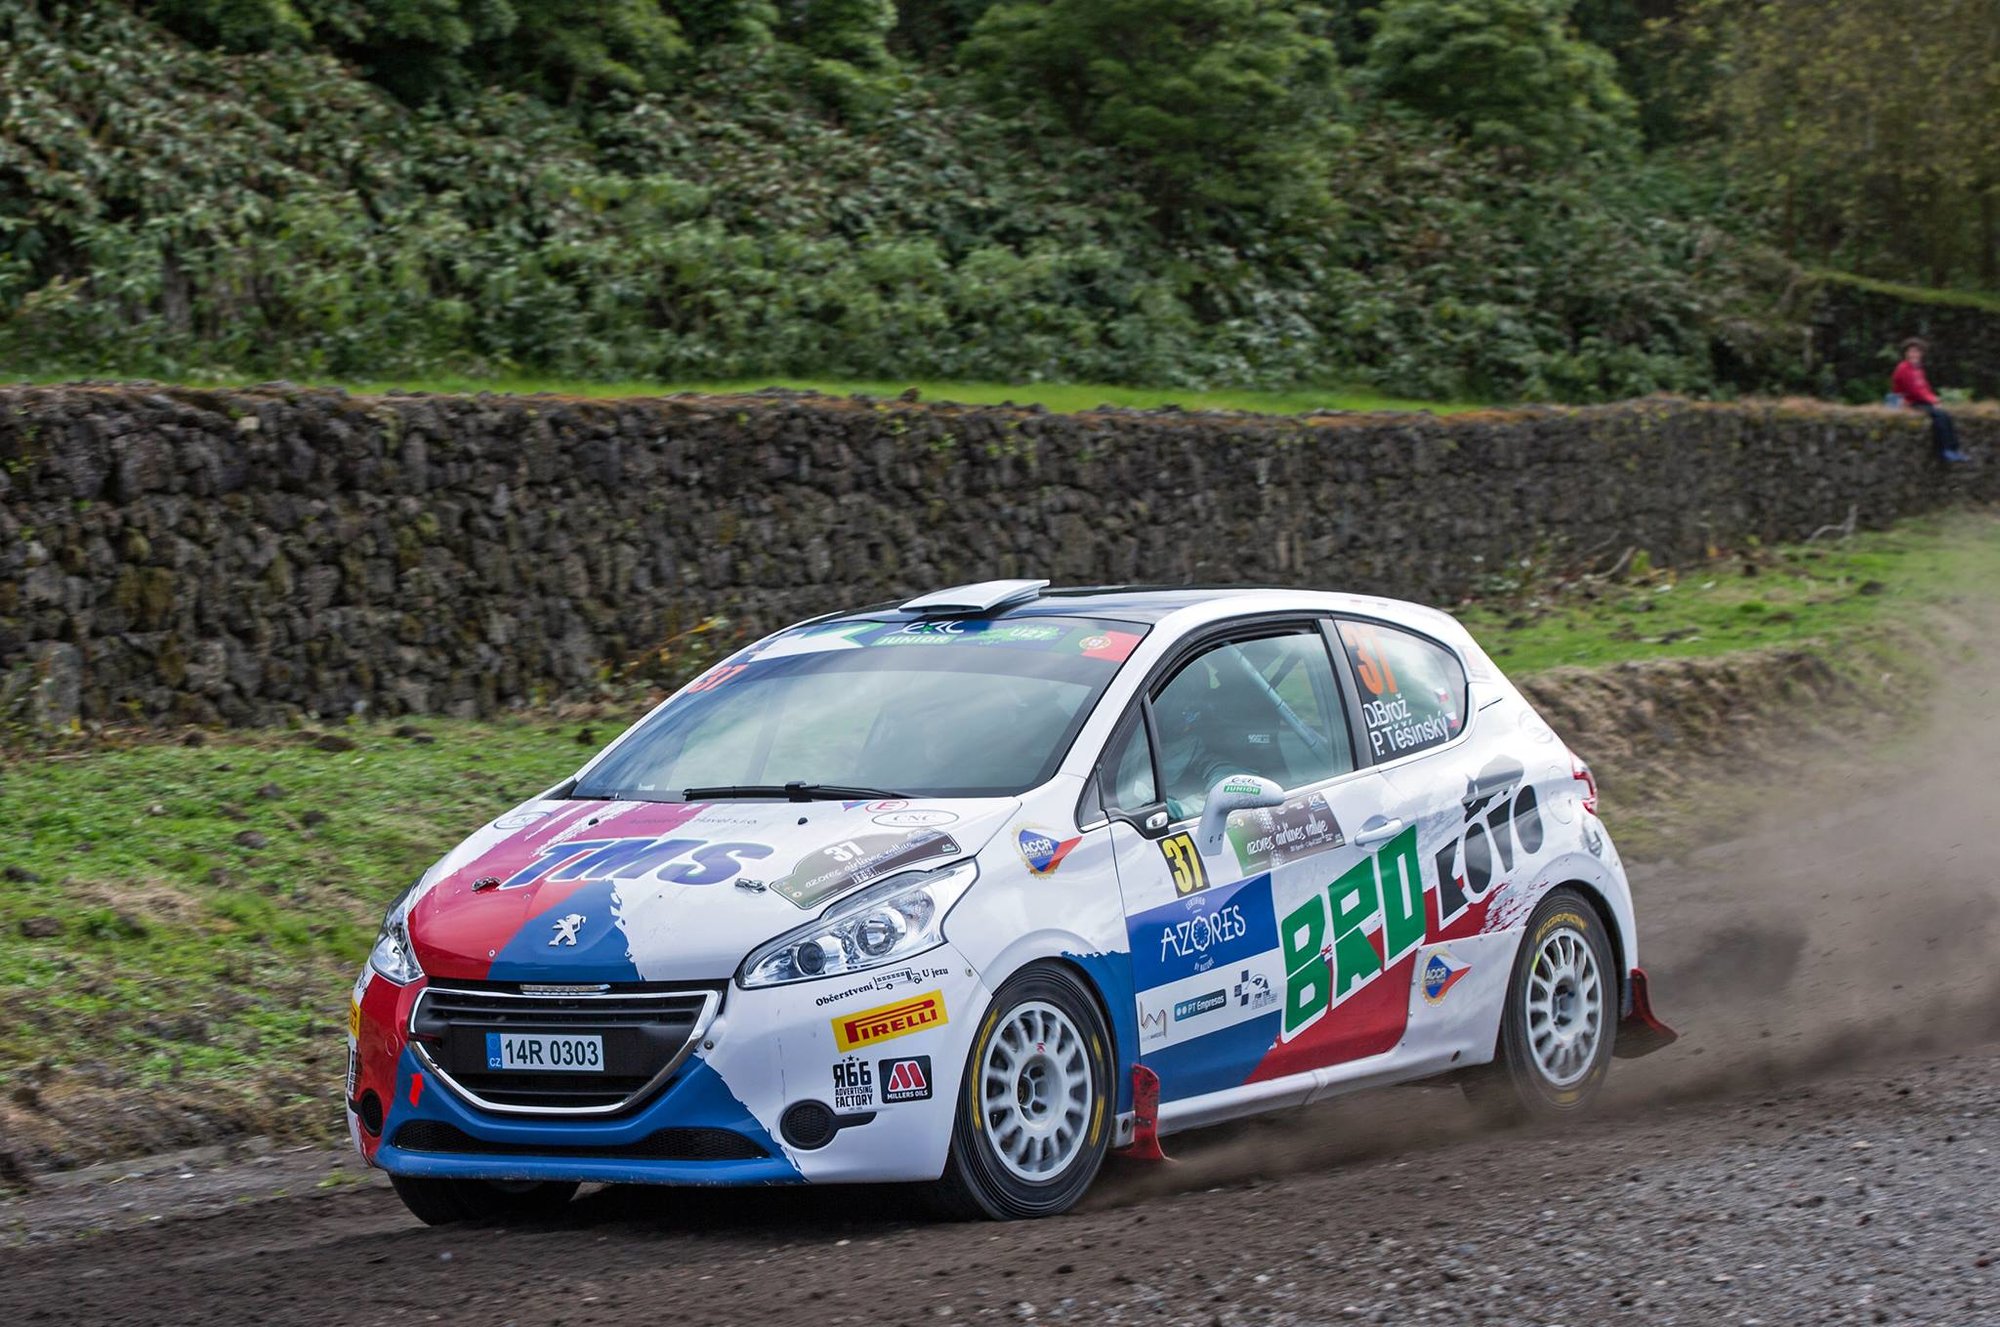 Azores Airlines Rallye